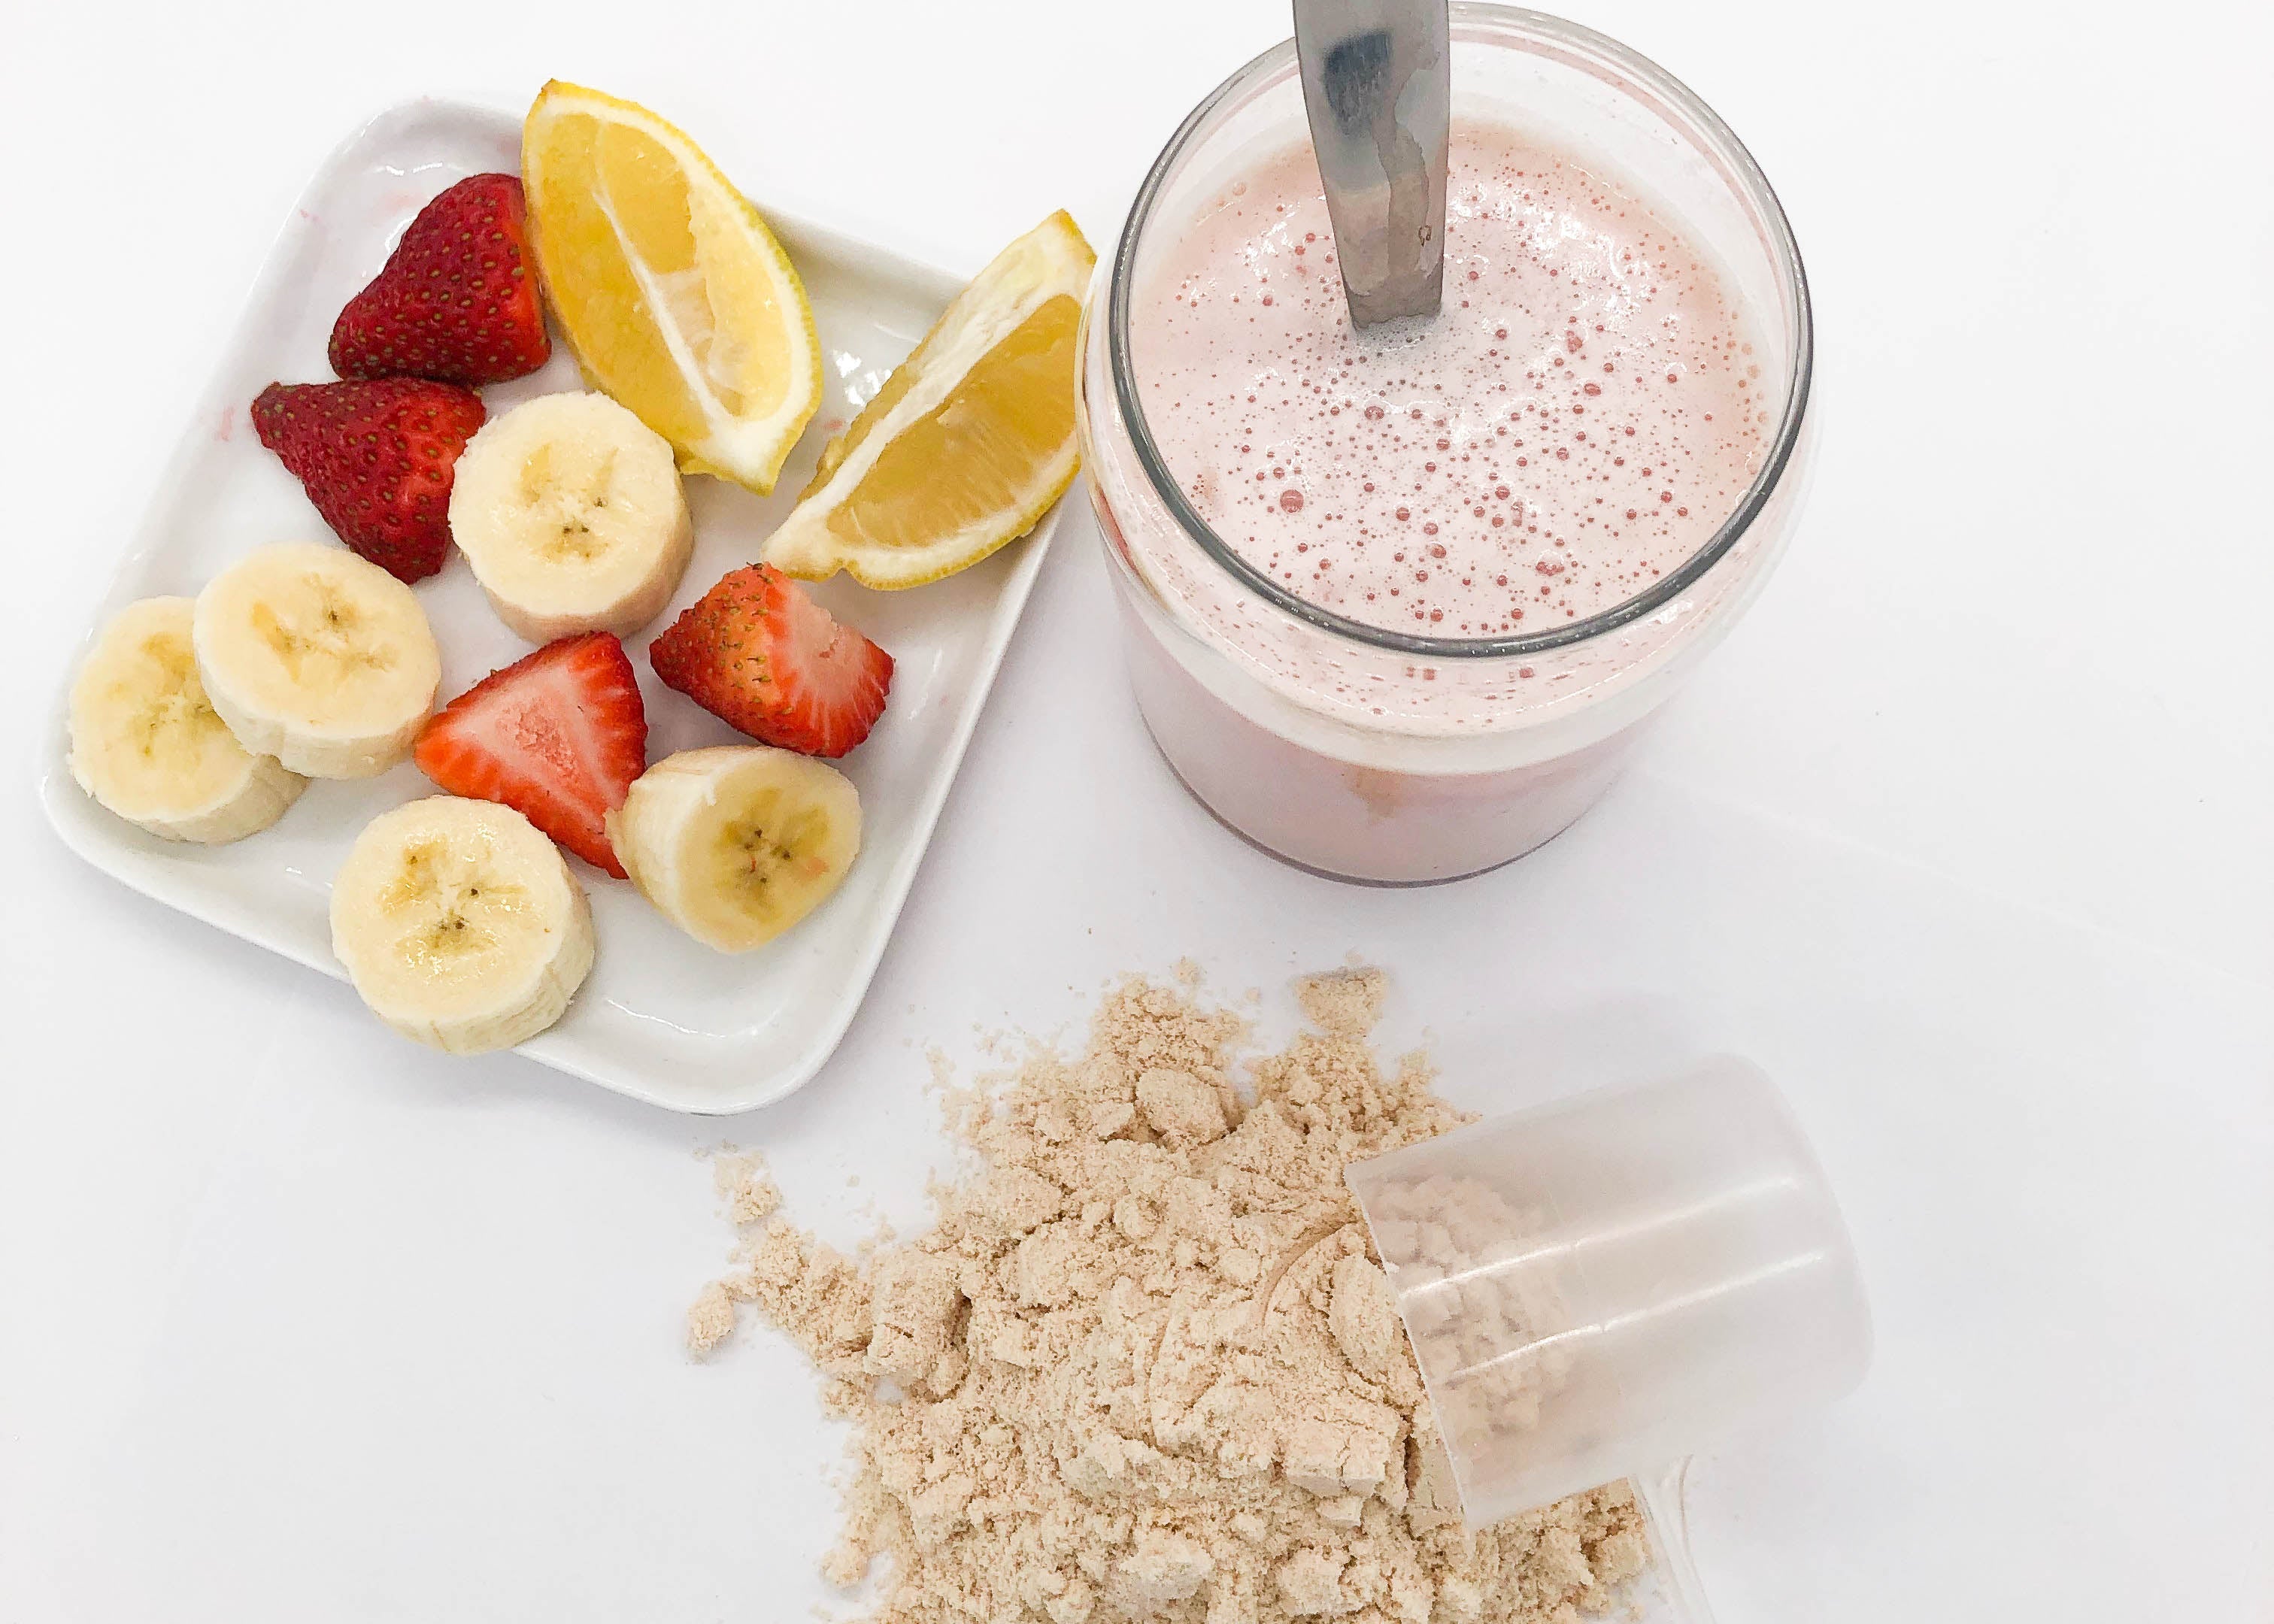 A scoop of Pounamu Protein Recovery Blend powder, a glass of Recovery blend powder mixed with water and a white square plate with cut lemon, strawberries and bananas on it.